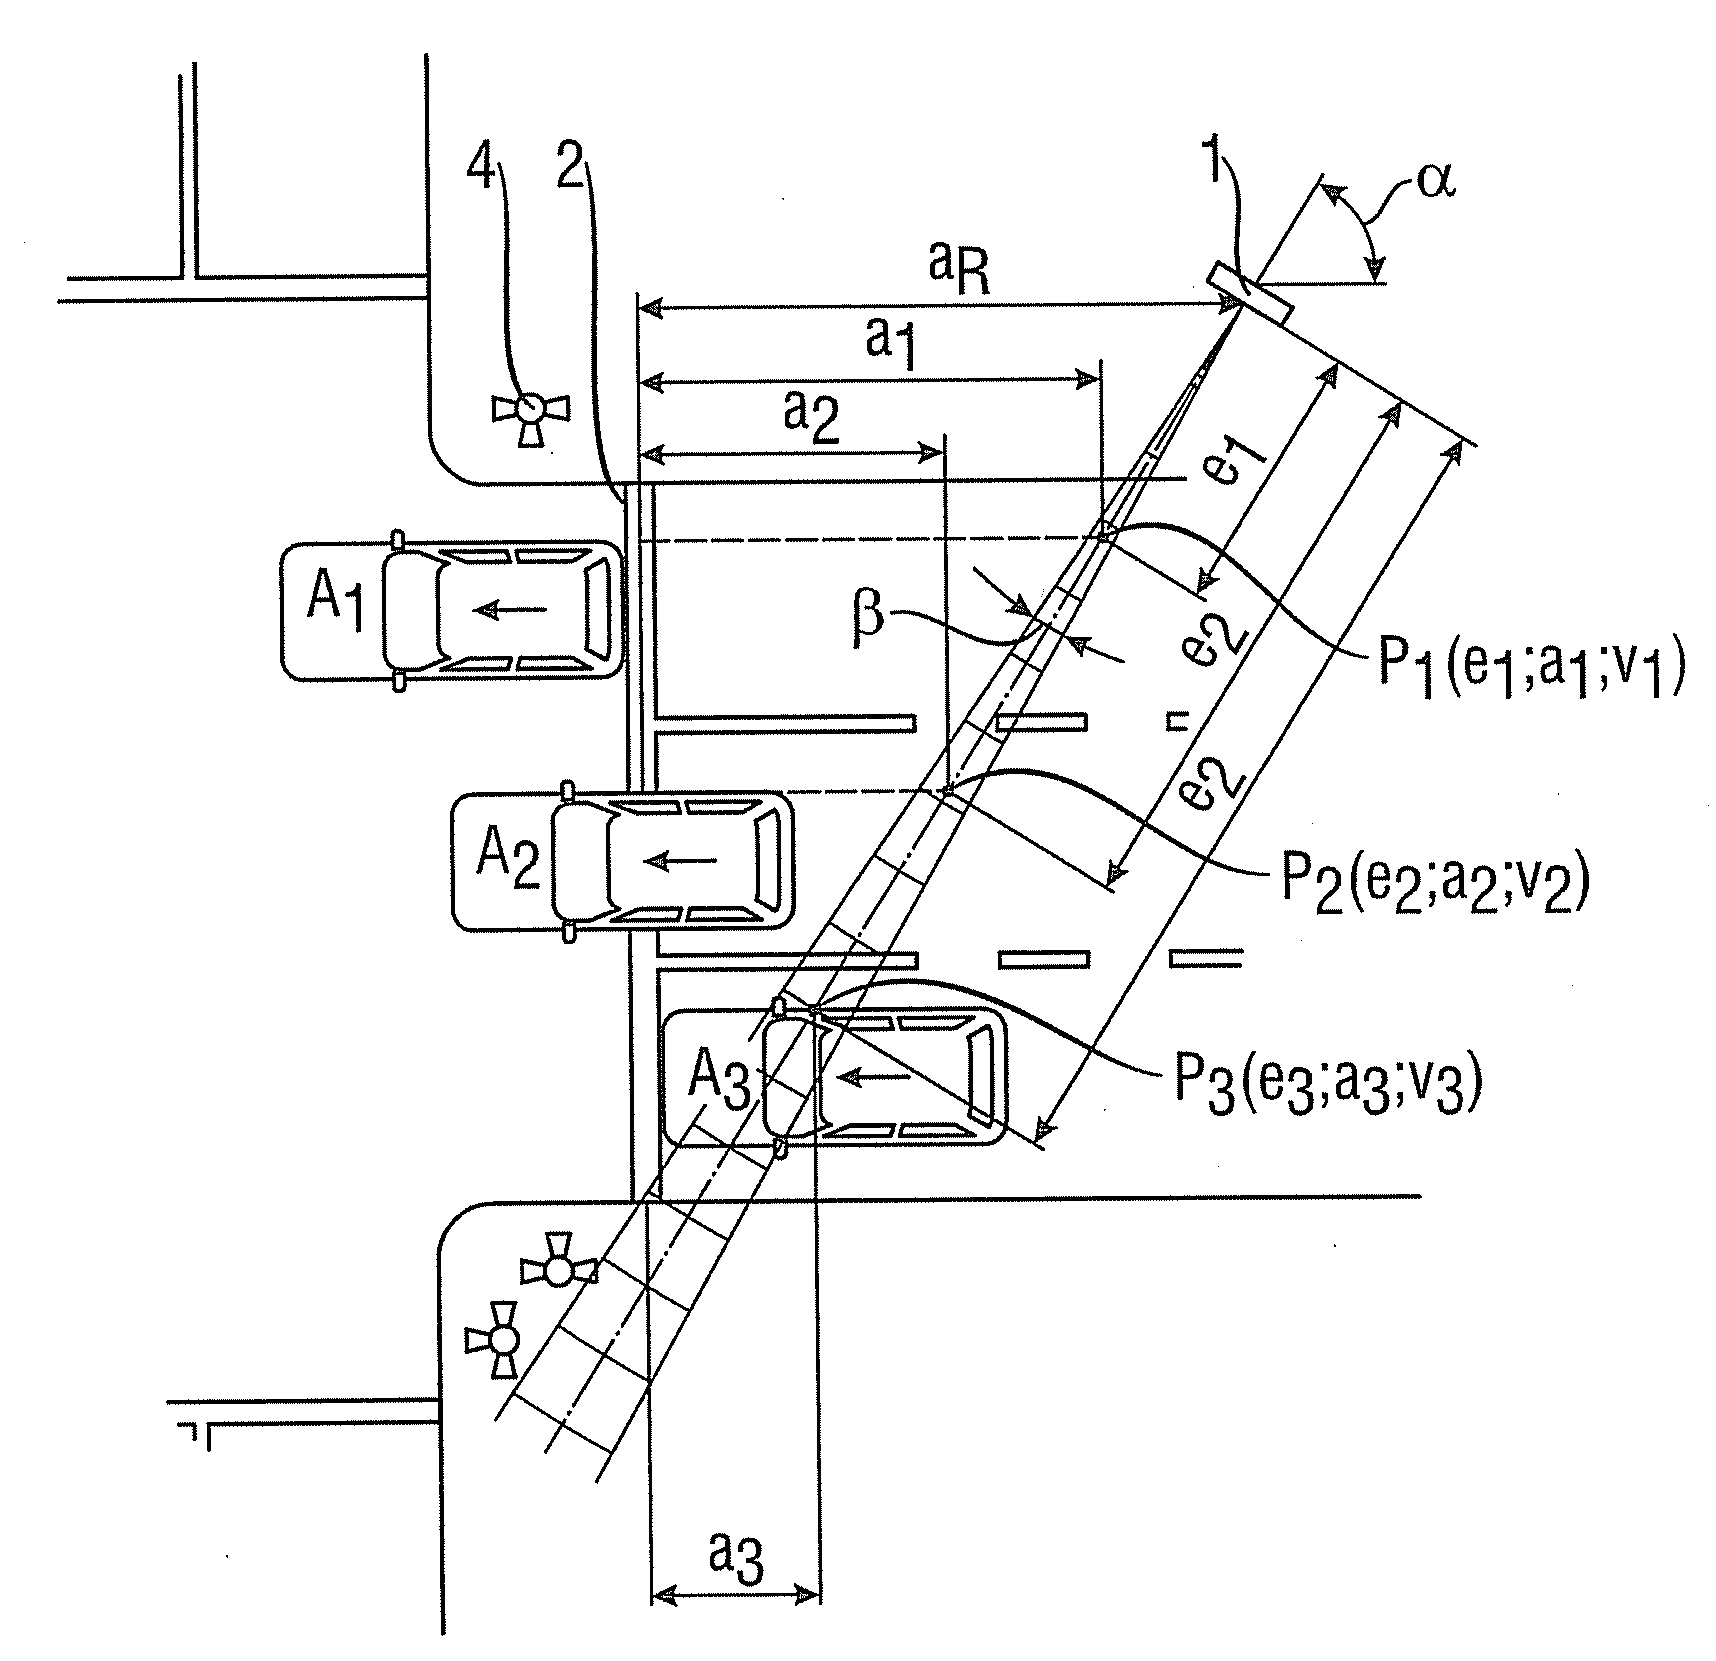 Method for Detecting and Documenting Traffic Violations at a Traffic Light